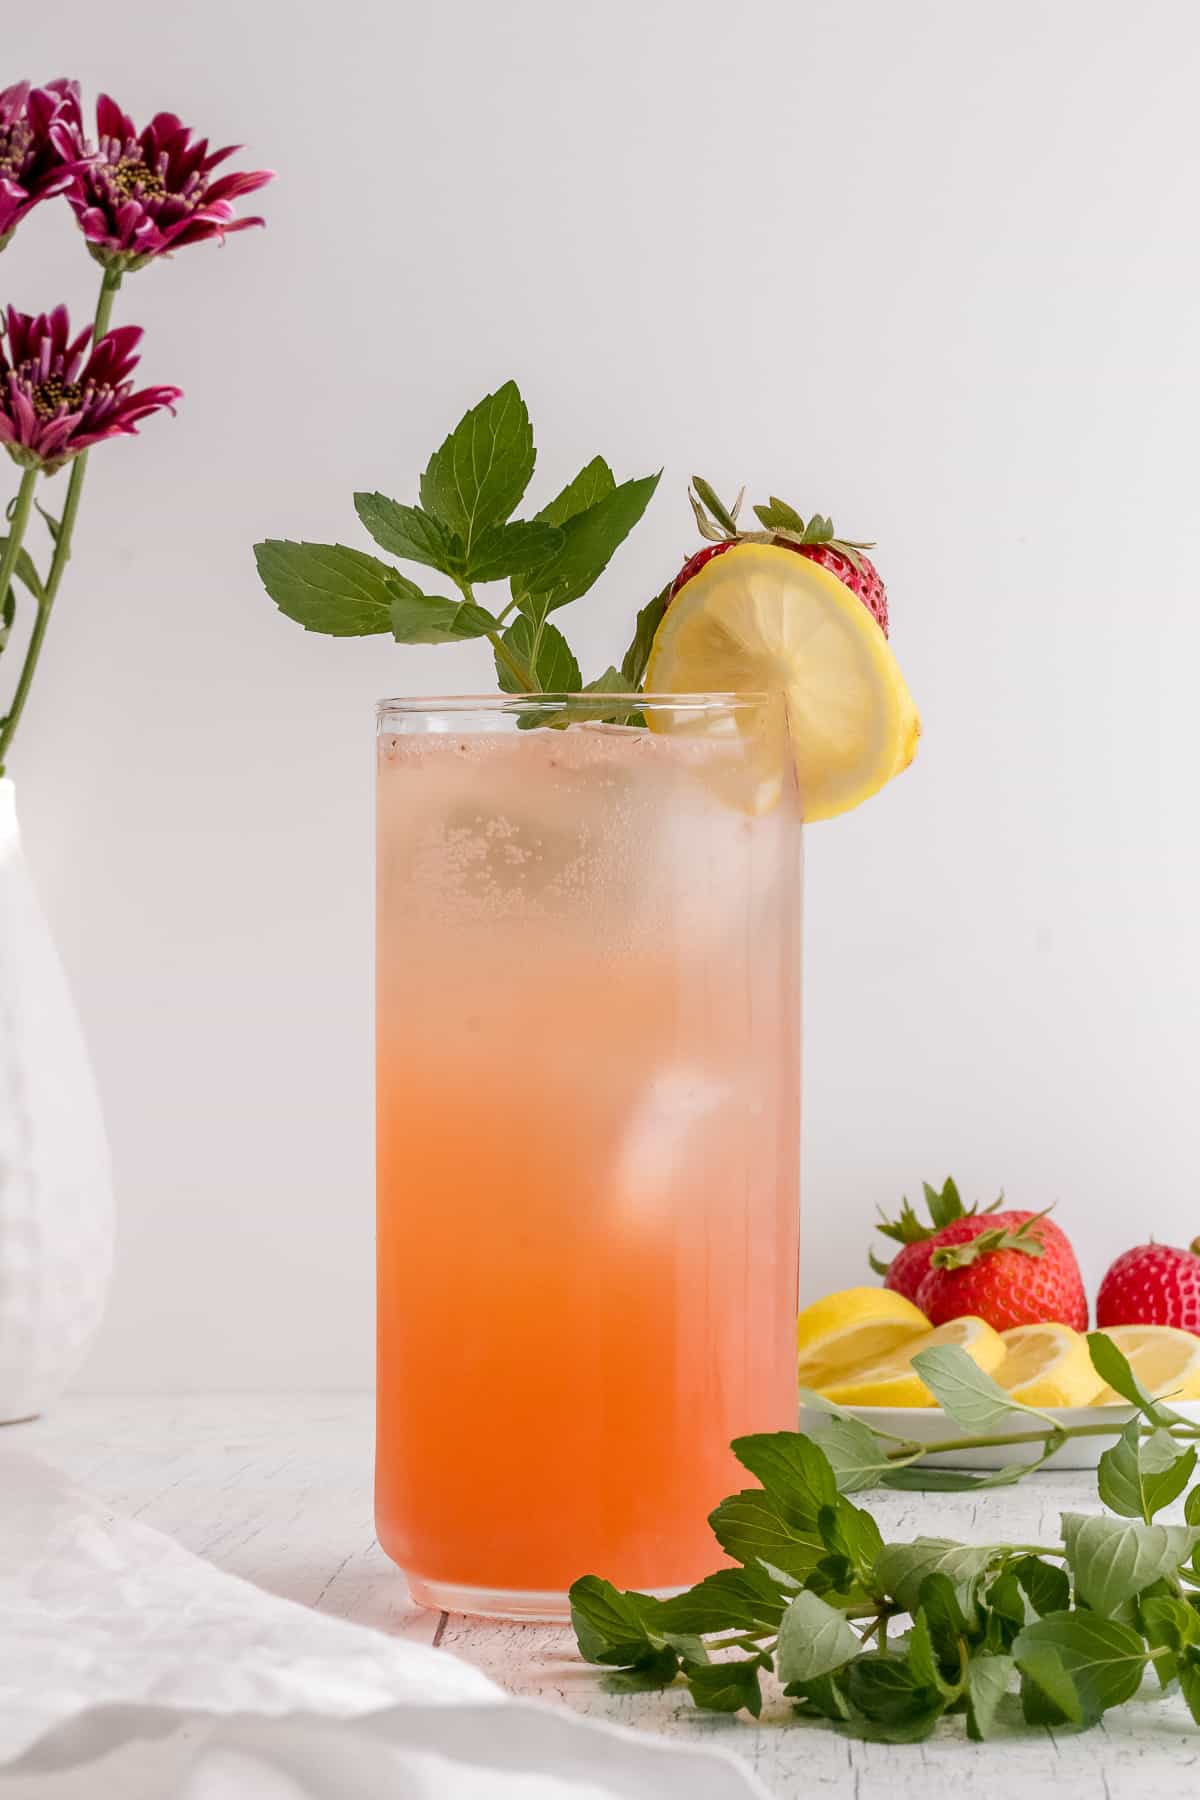 Strawberry vodka lemonade in a tall glass with a lemon wedge and ice